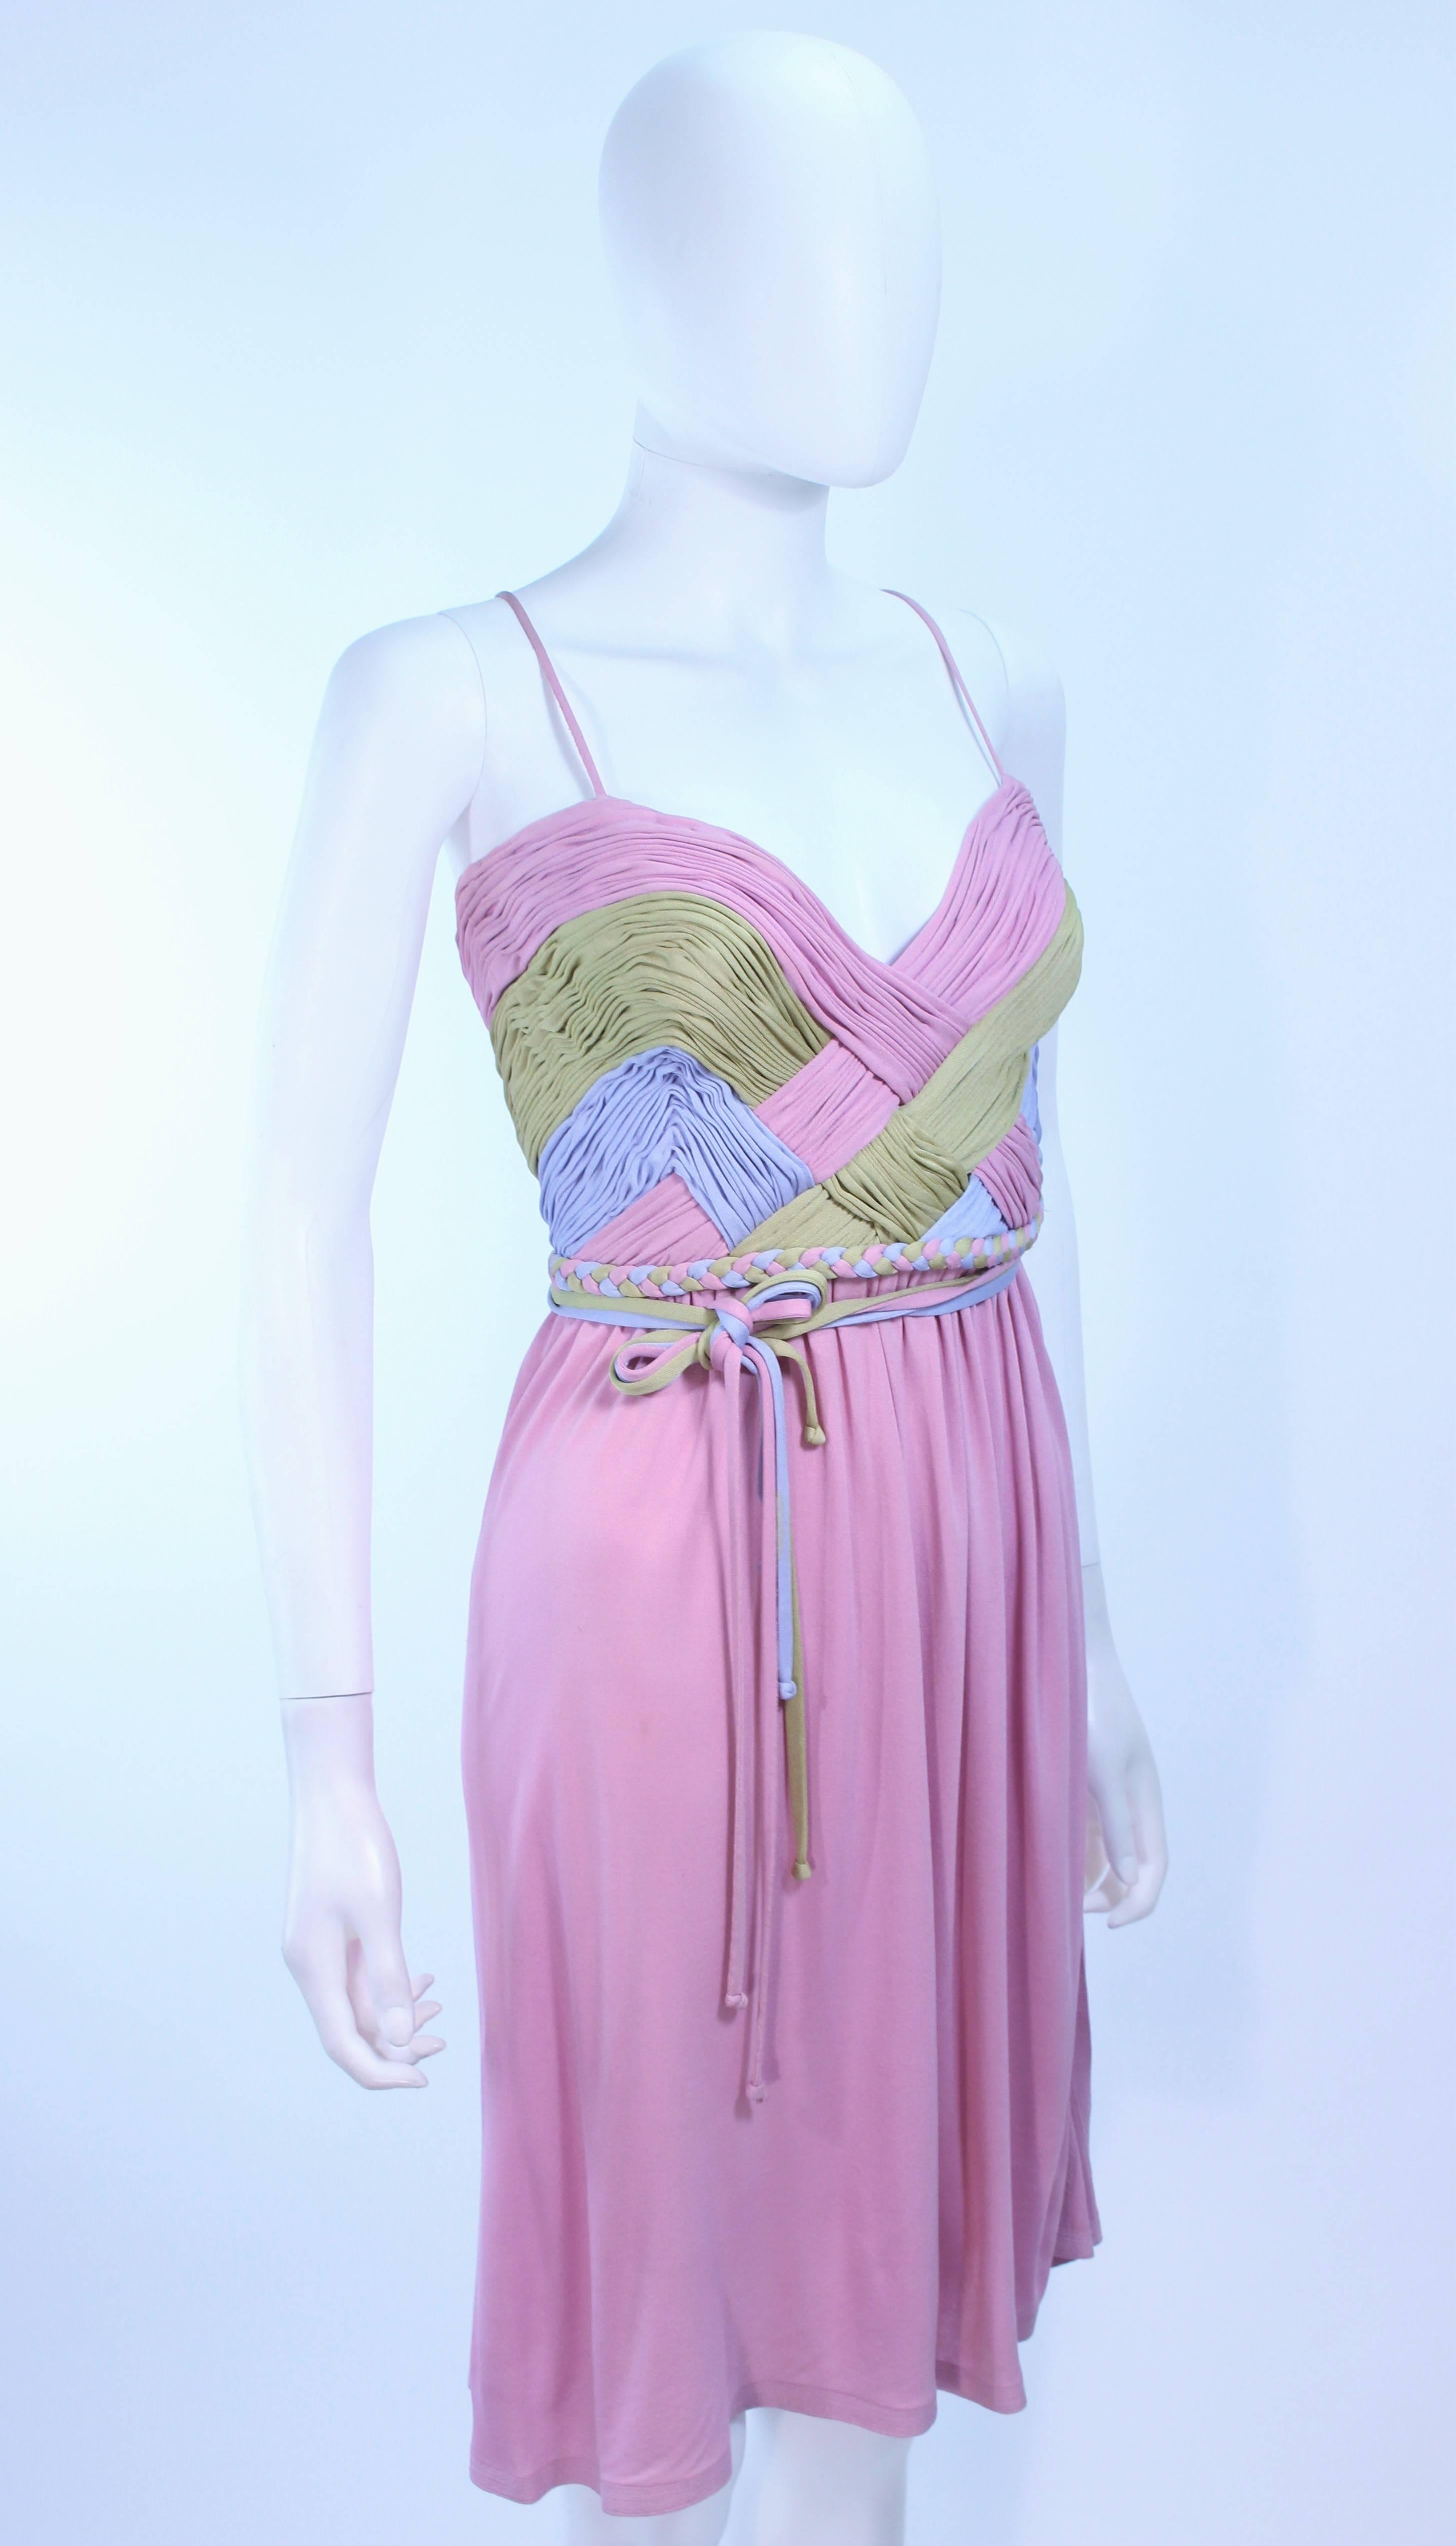 MAGGY REEVES 1970'S Purple and Green Draped Jersey Cocktail Dress Size 2 For Sale 1